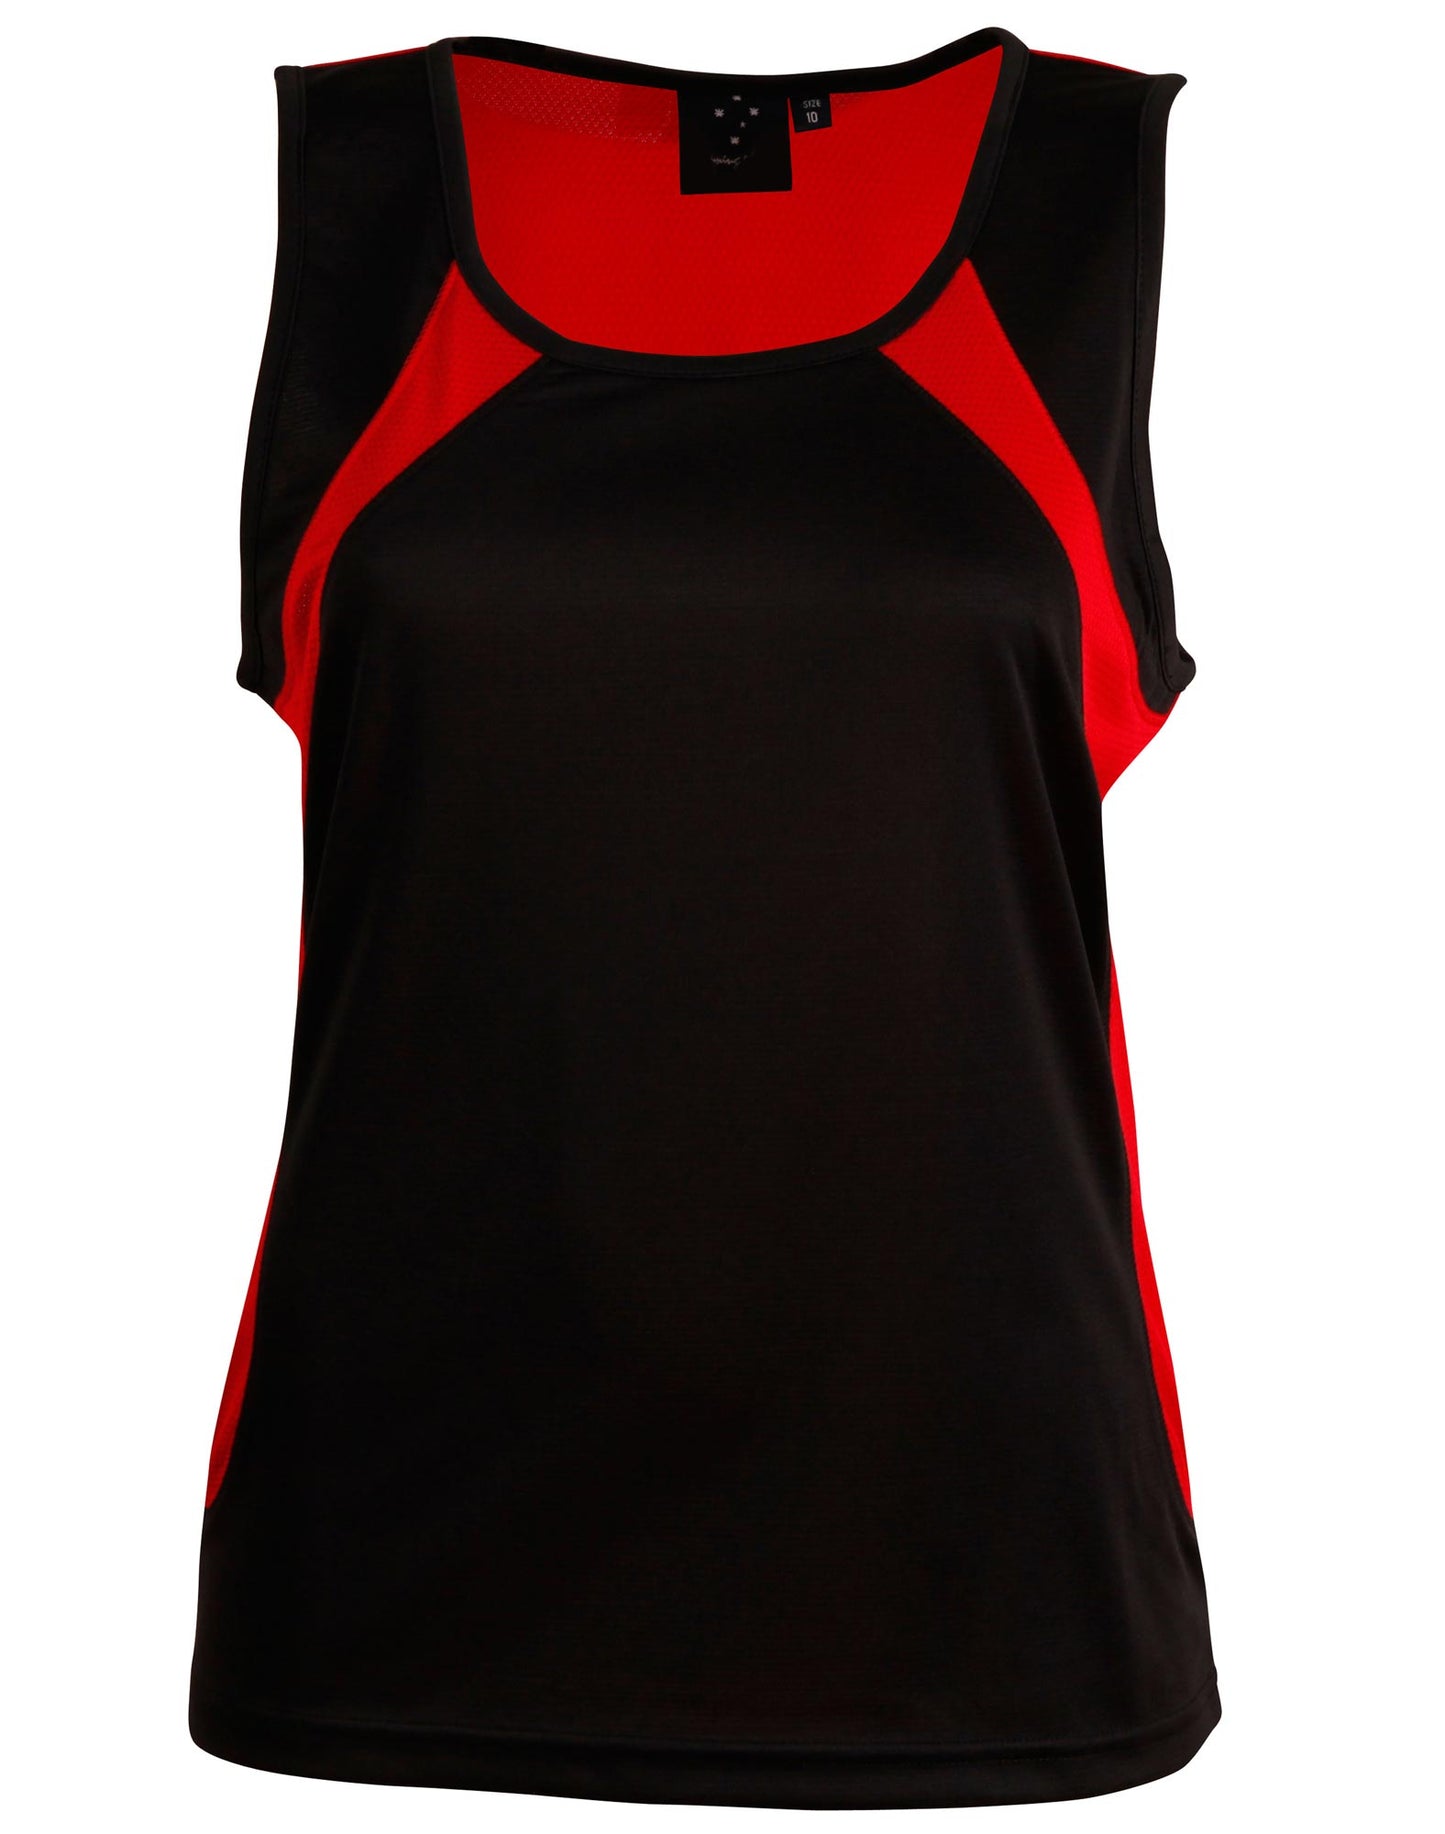 Ladies Sprint Singlet - made by AIW